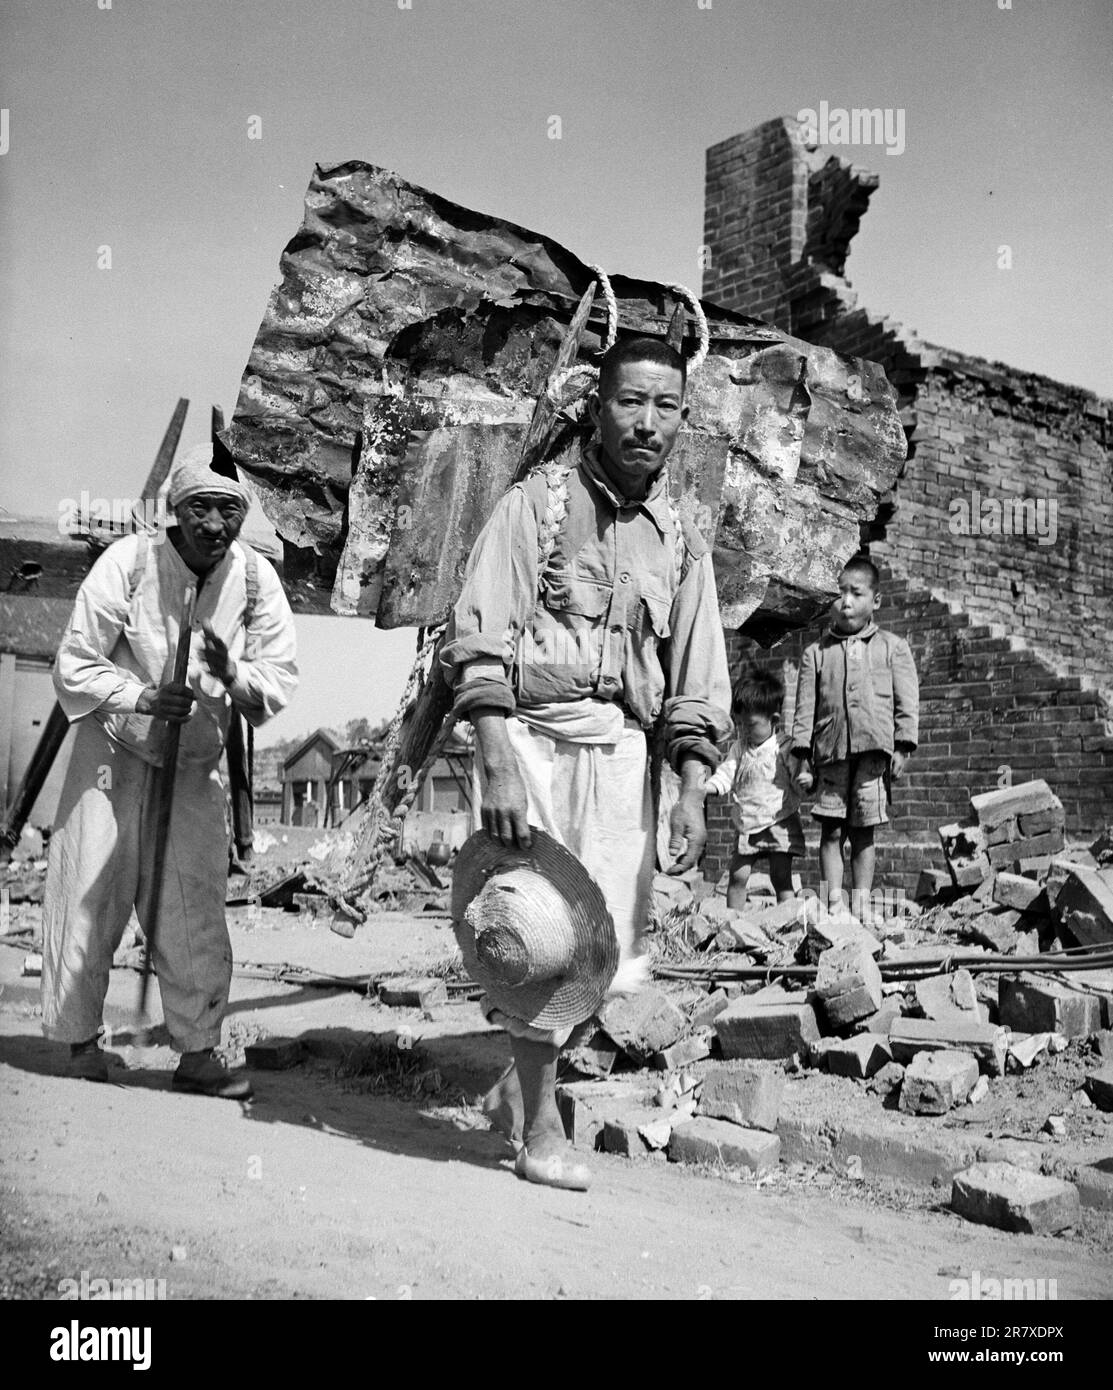 Civilians recovering building materials from the ruins in Inchon during the Korean War. Stock Photo